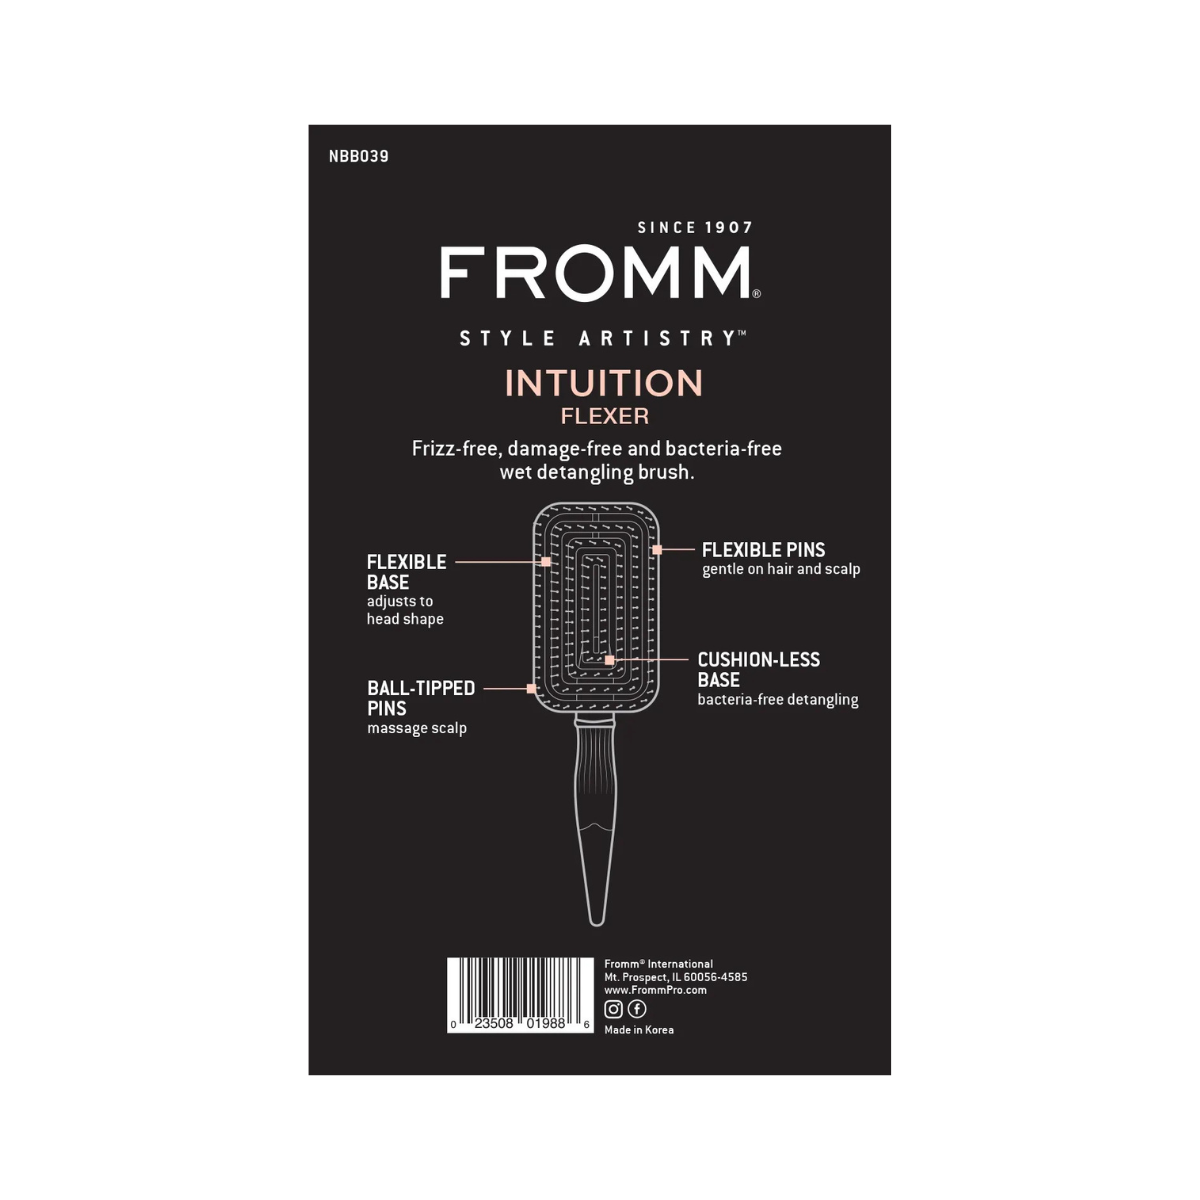 FROMM Intuition Flexer Brush